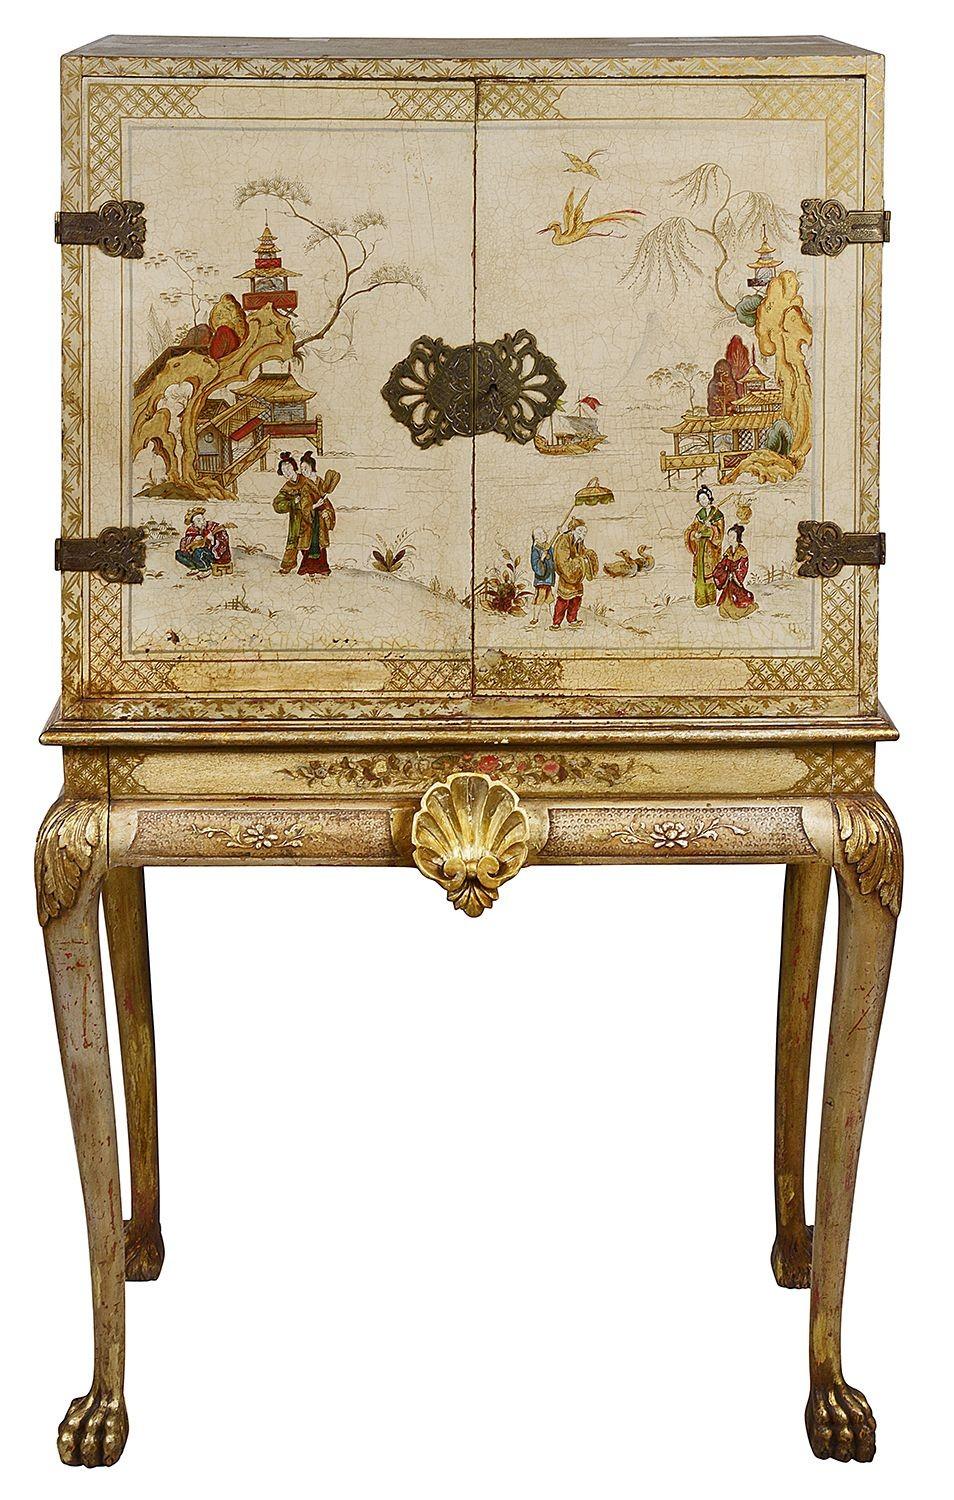 A very decorative early 20th Century cream coloured Chinoiserie lacquer cabinet on stand.Having classical scenes of courtiers and Geisha girls walking around the gardens of pagoda buildings by the lake side. Two doors opening to reveal shelves